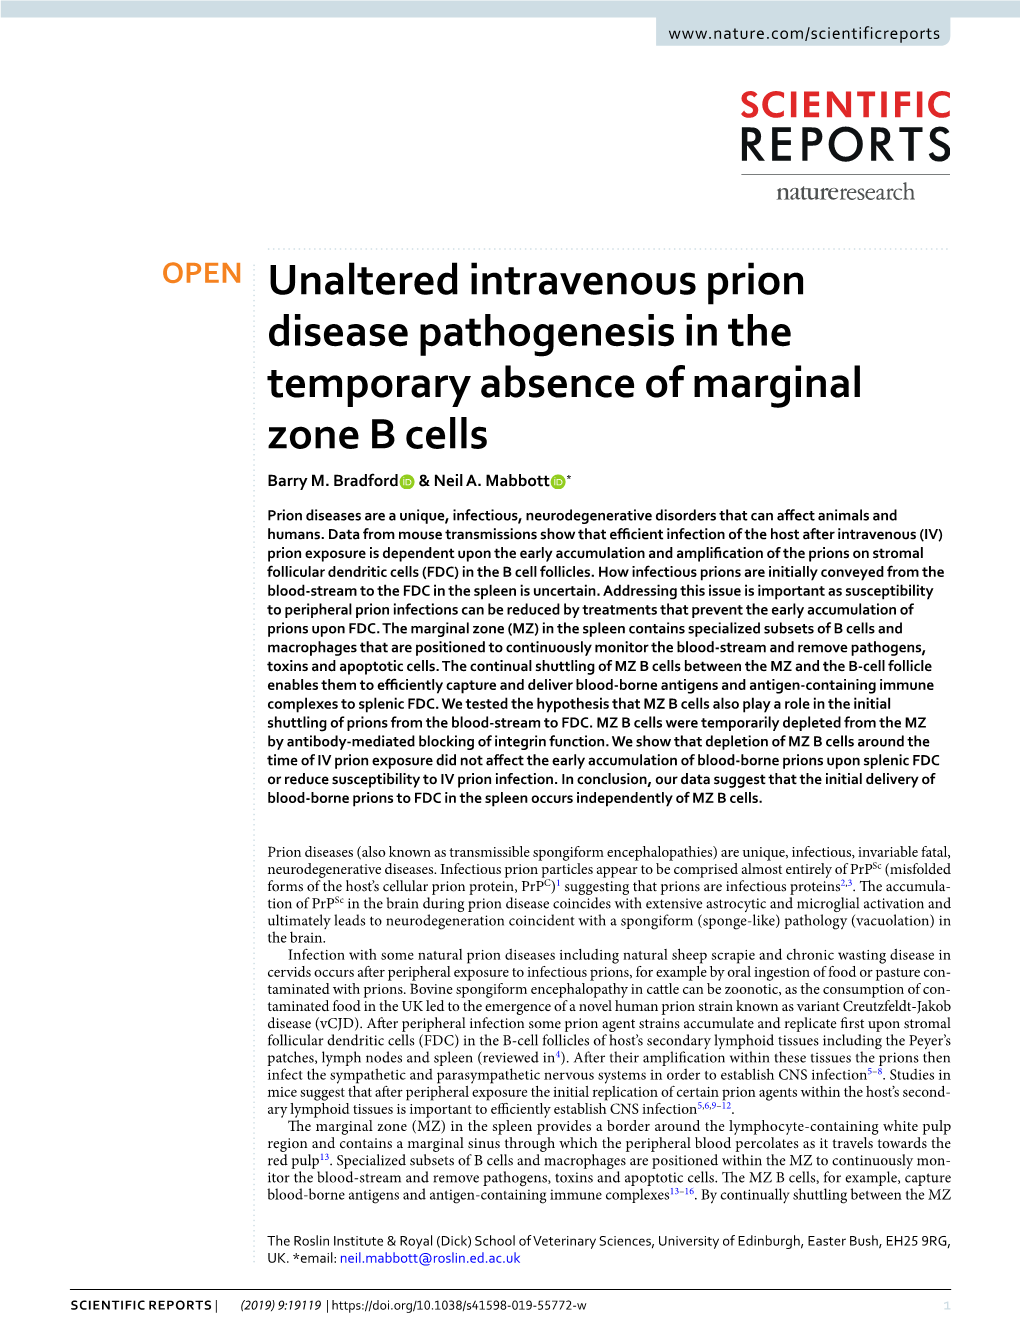 Unaltered Intravenous Prion Disease Pathogenesis in the Temporary Absence of Marginal Zone B Cells Barry M